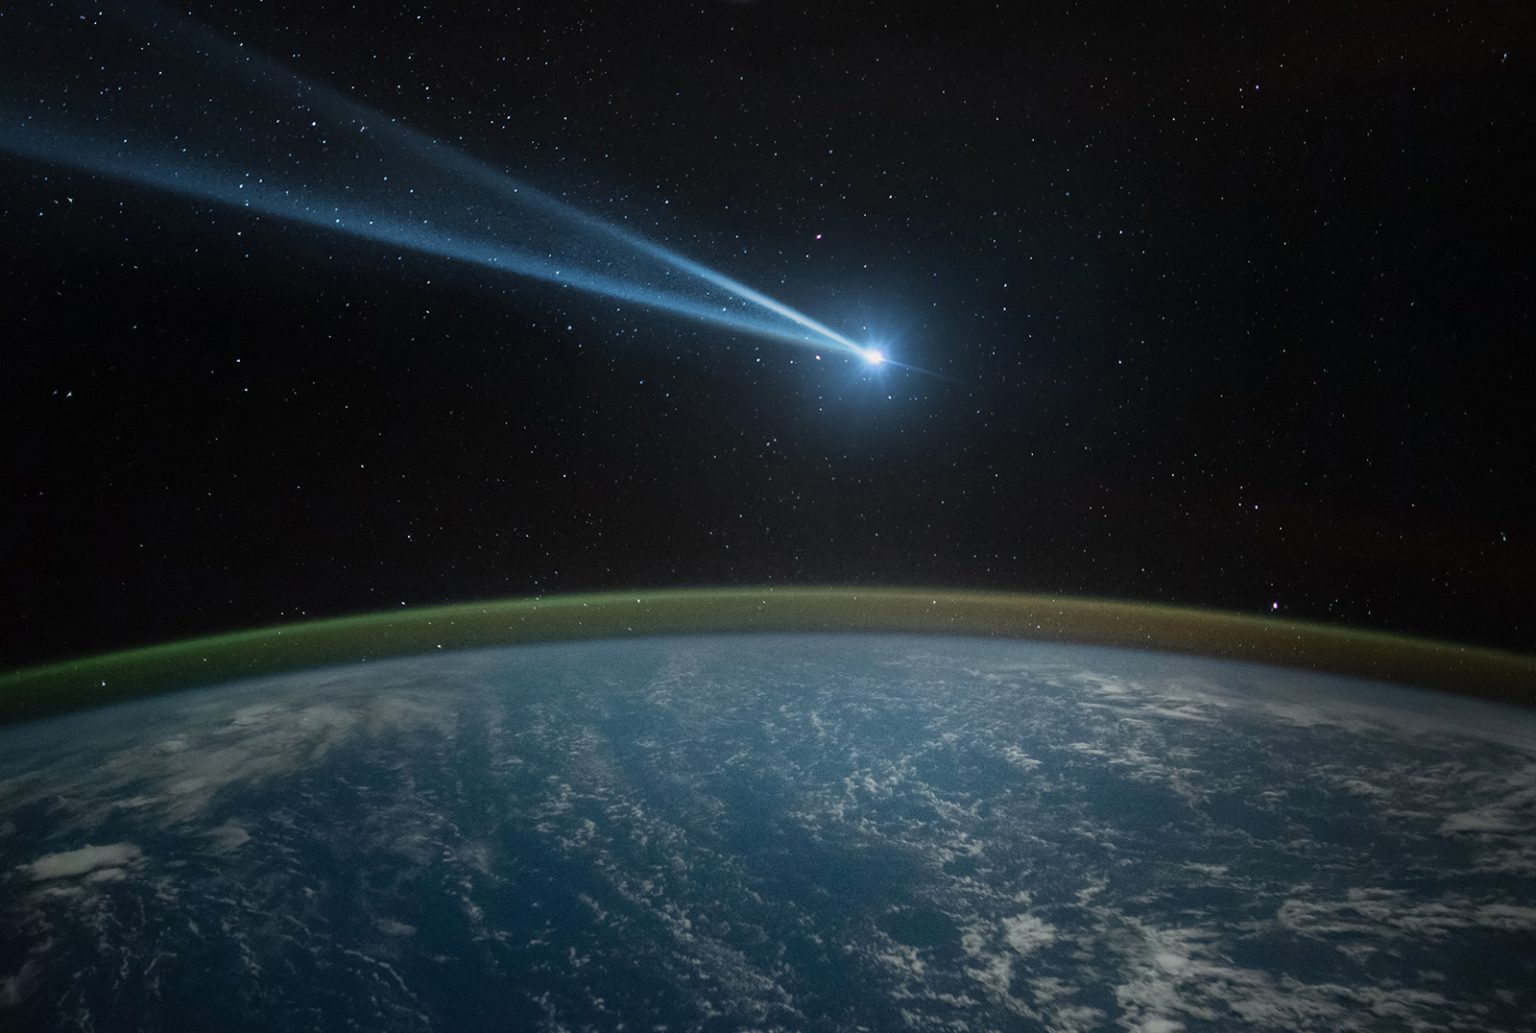 A 1,600-foot-wide asteroid is about to buzz past Earth